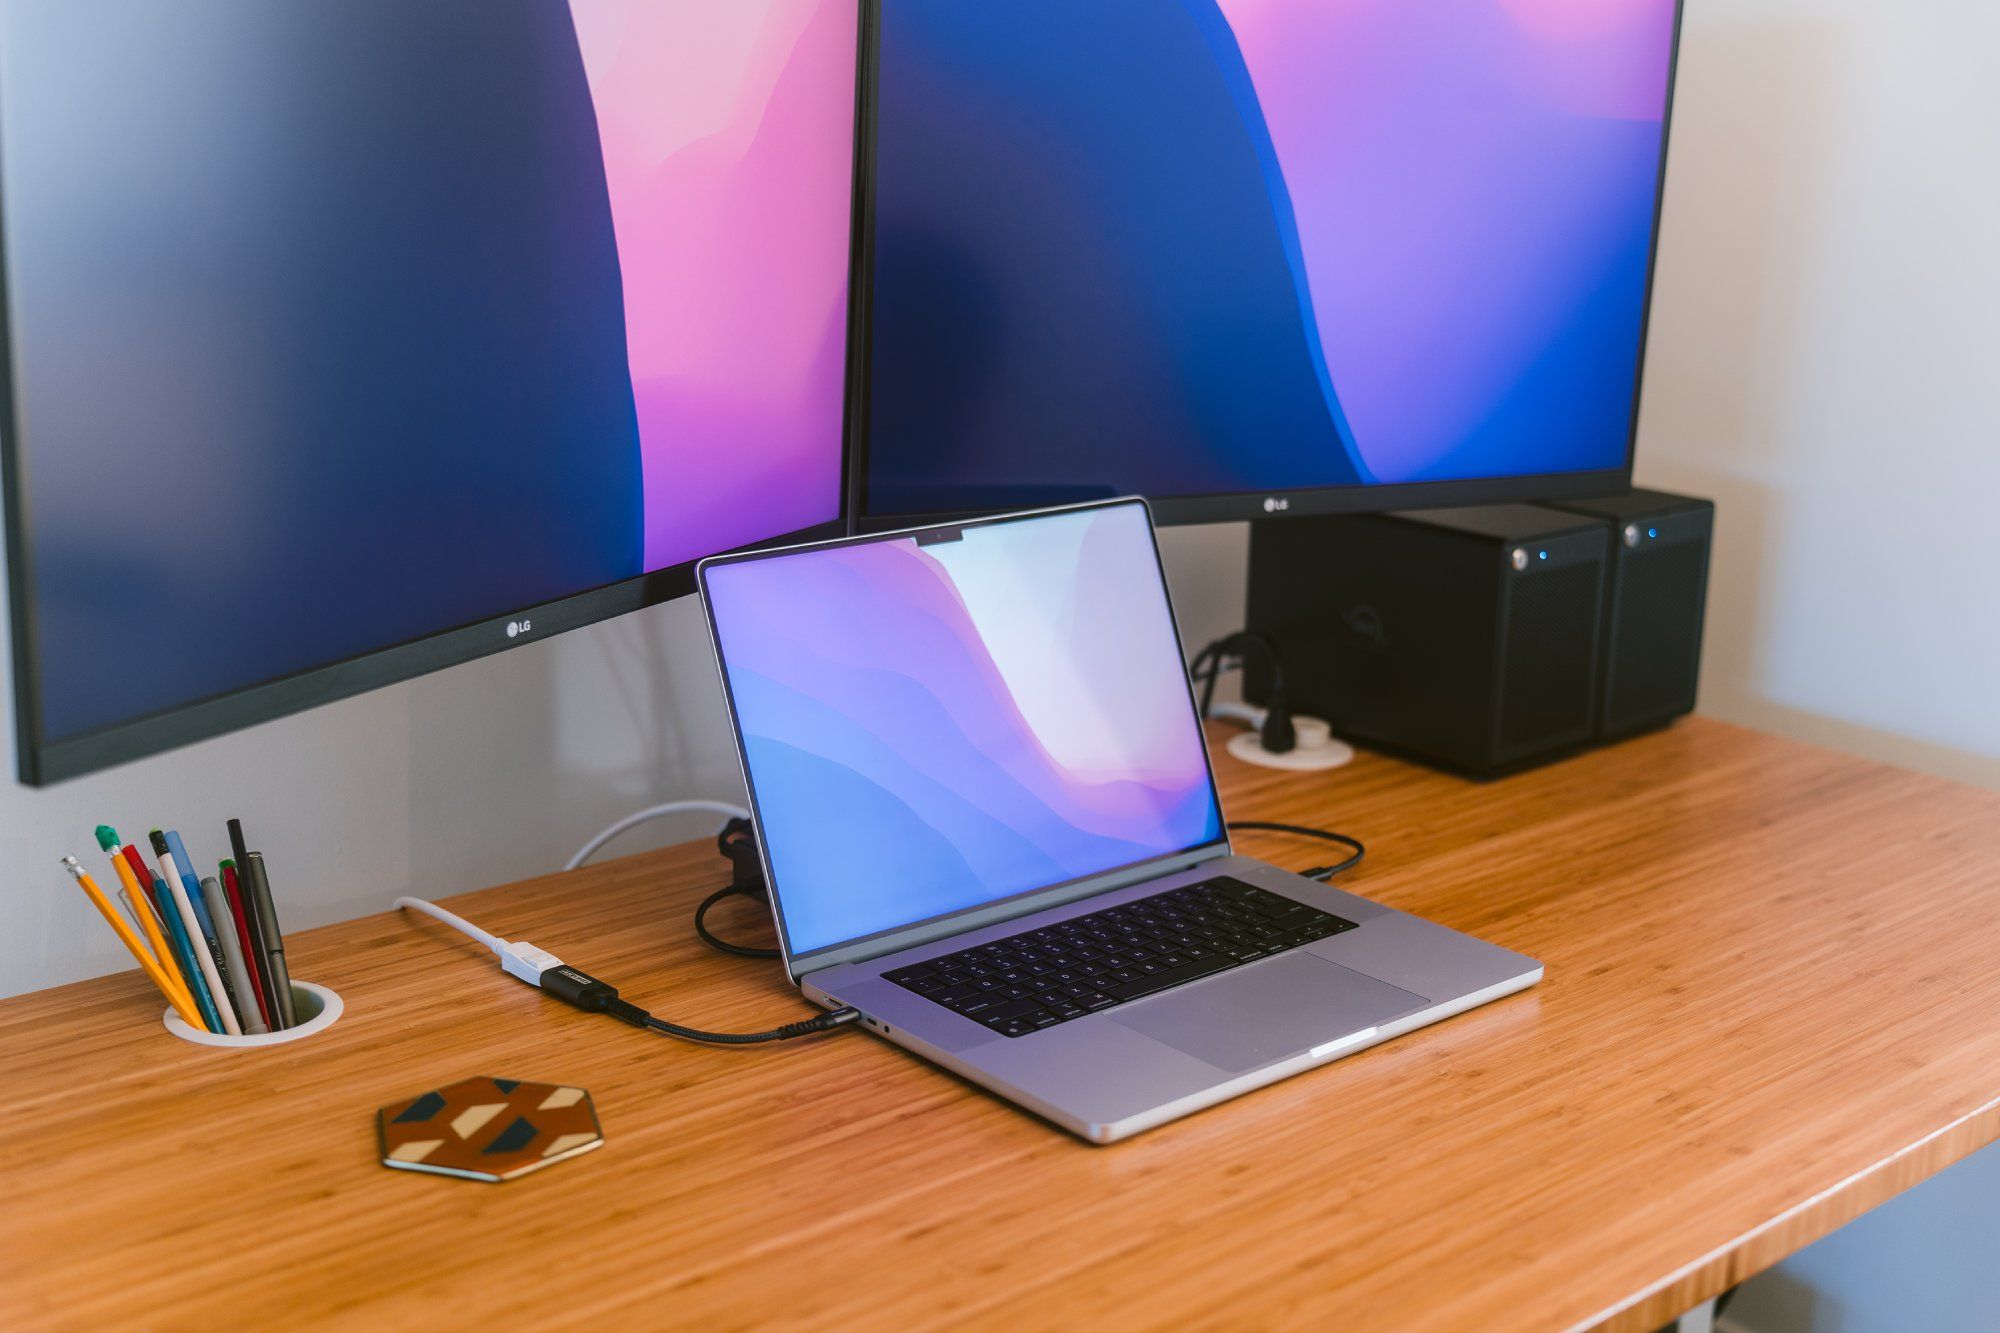 A contemporary workspace featuring two large LG monitors with gradient wallpapers, a sleek laptop with a similar wallpaper, an assortment of colored pens in a holder, a decorative coaster, and a couple of compact desktop speakers. The devices are neatly arranged on a wooden table